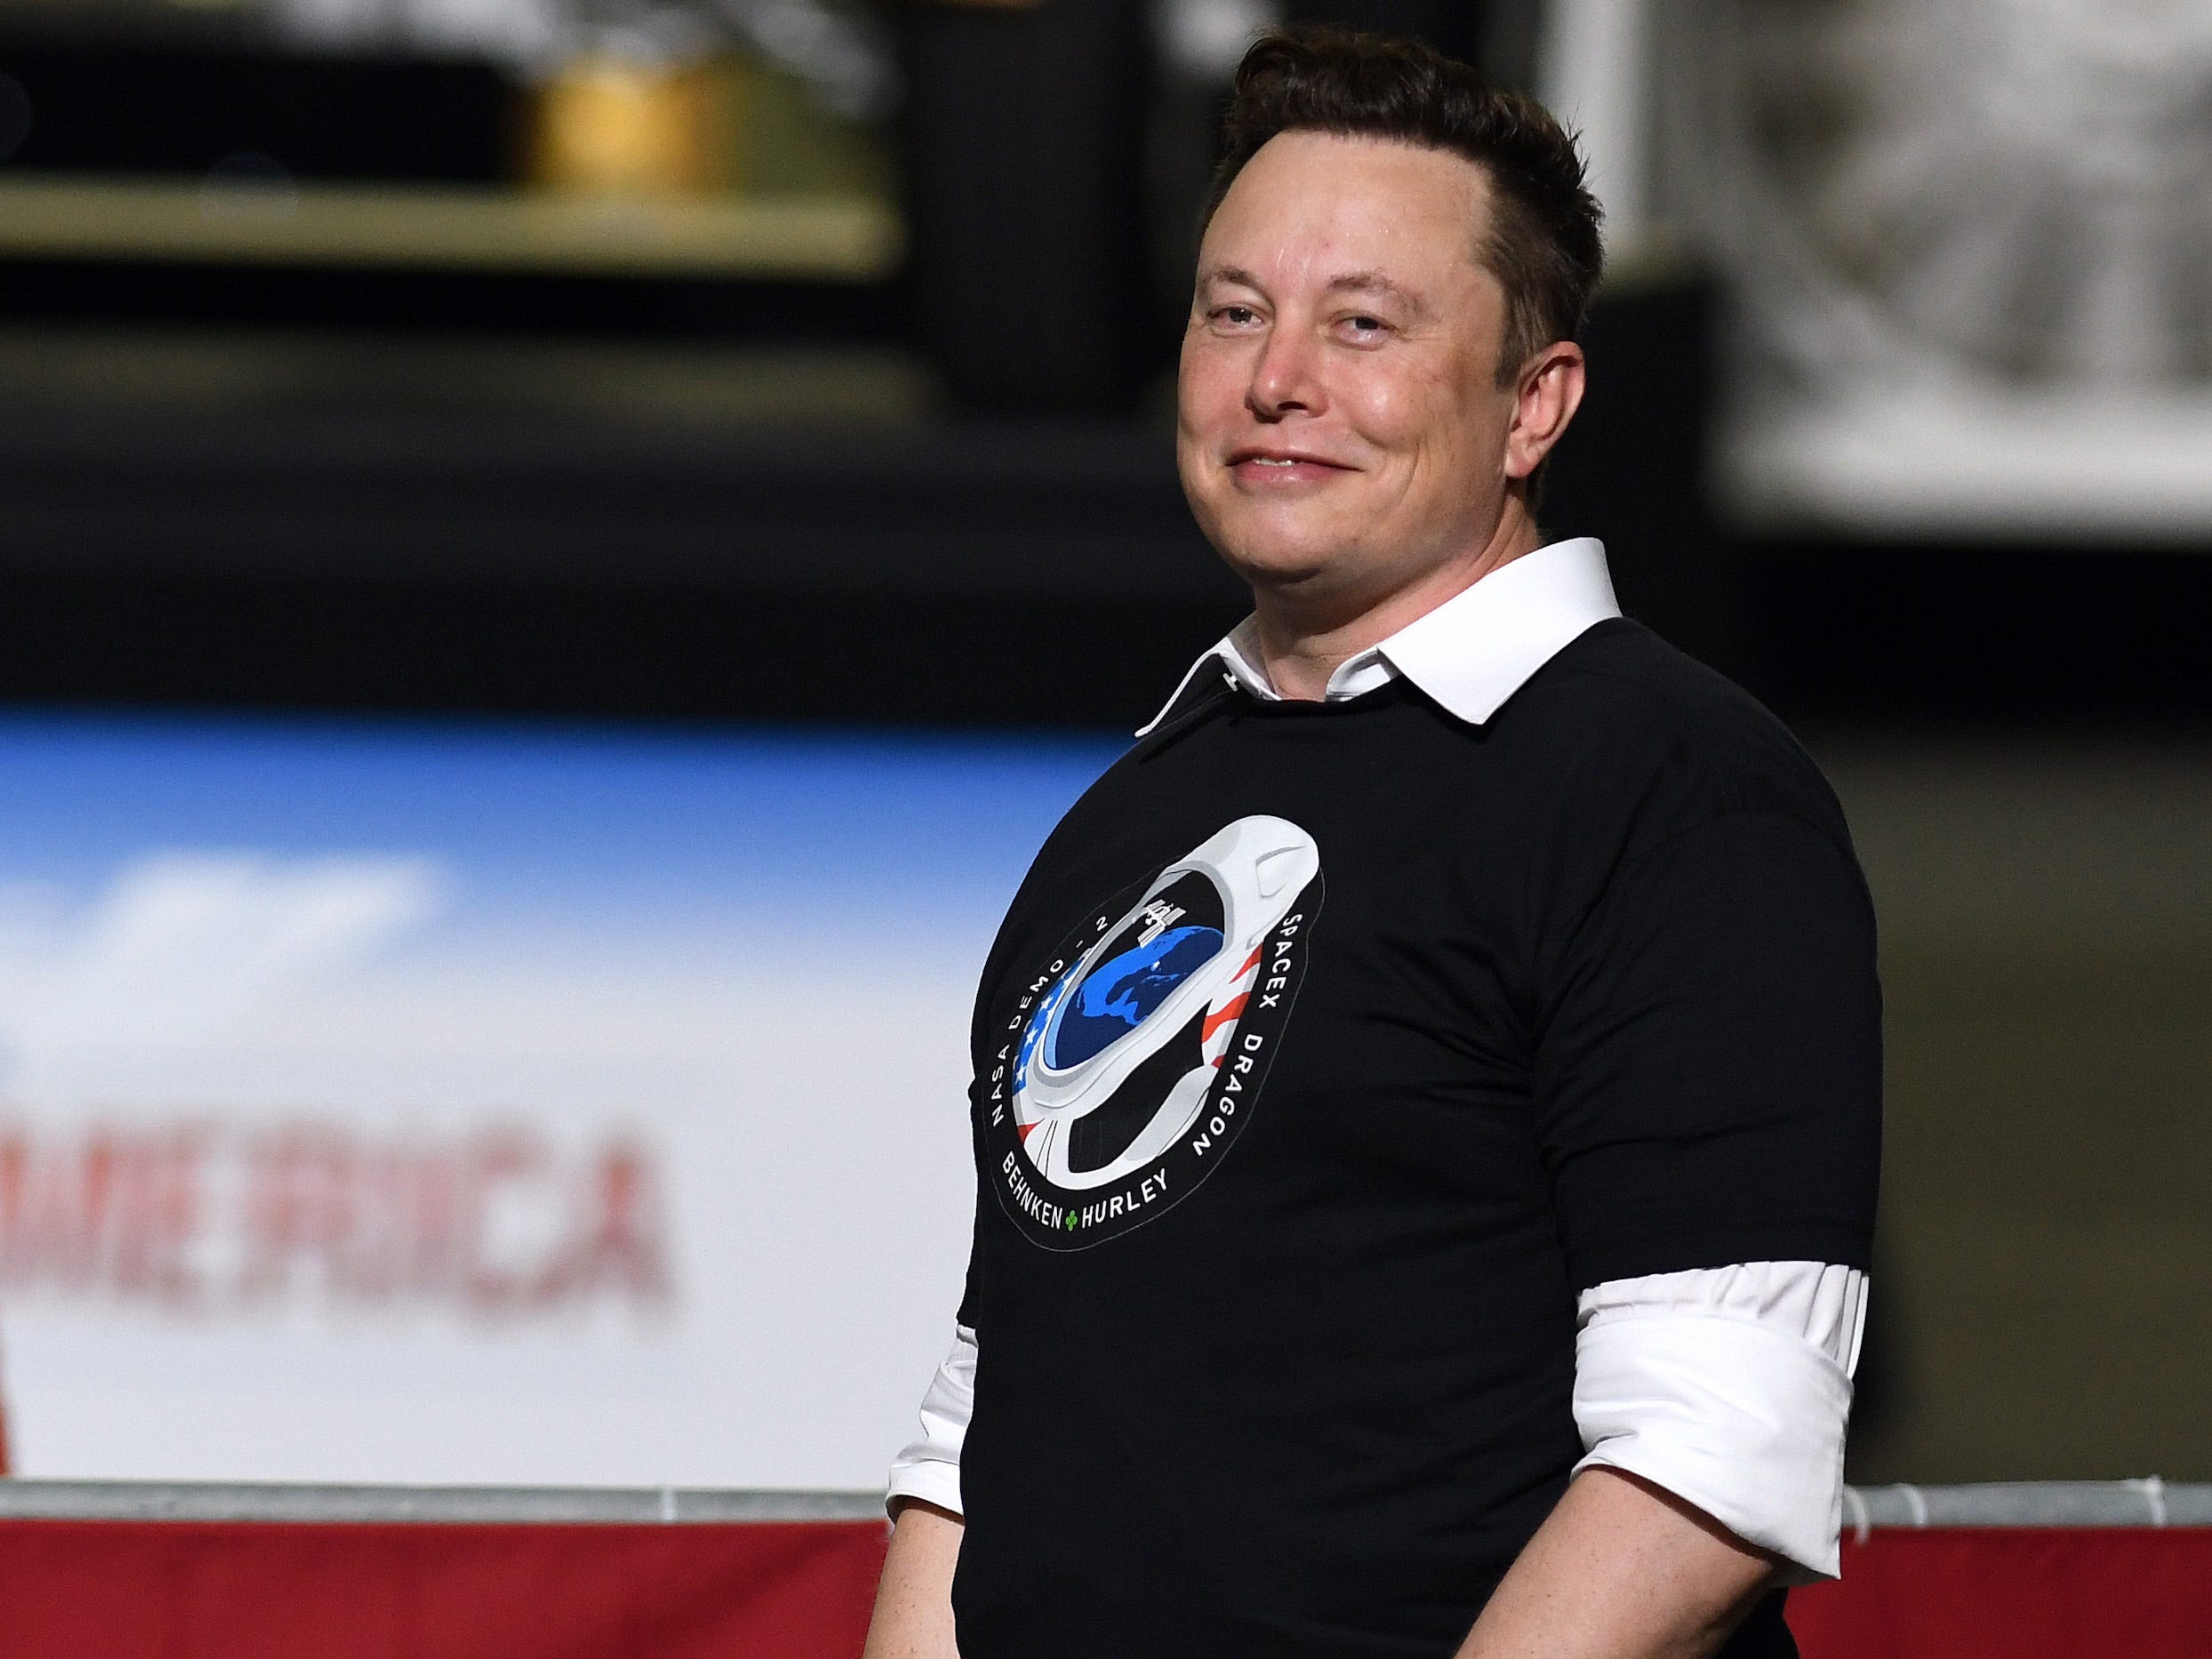 <p>Earlier in 2018, <a href="https://www.businessinsider.com/larry-ellison-defends-elon-musk-tesla-slams-media-2018-10">Ellison described Tesla CEO Elon Musk</a> as a "close friend," and defended him from critics. When Musk acquired Twitter — now X — in 2022, Ellison offered to invest $1 billion.</p><p>Musk went on to help Ellison reset his forgotten password, according to <a href="https://www.businessinsider.com/elon-musk-helped-larry-ellison-reset-forgotten-twitter-password-biographer-2023-9">biographer Walter Isaacson</a>.</p>